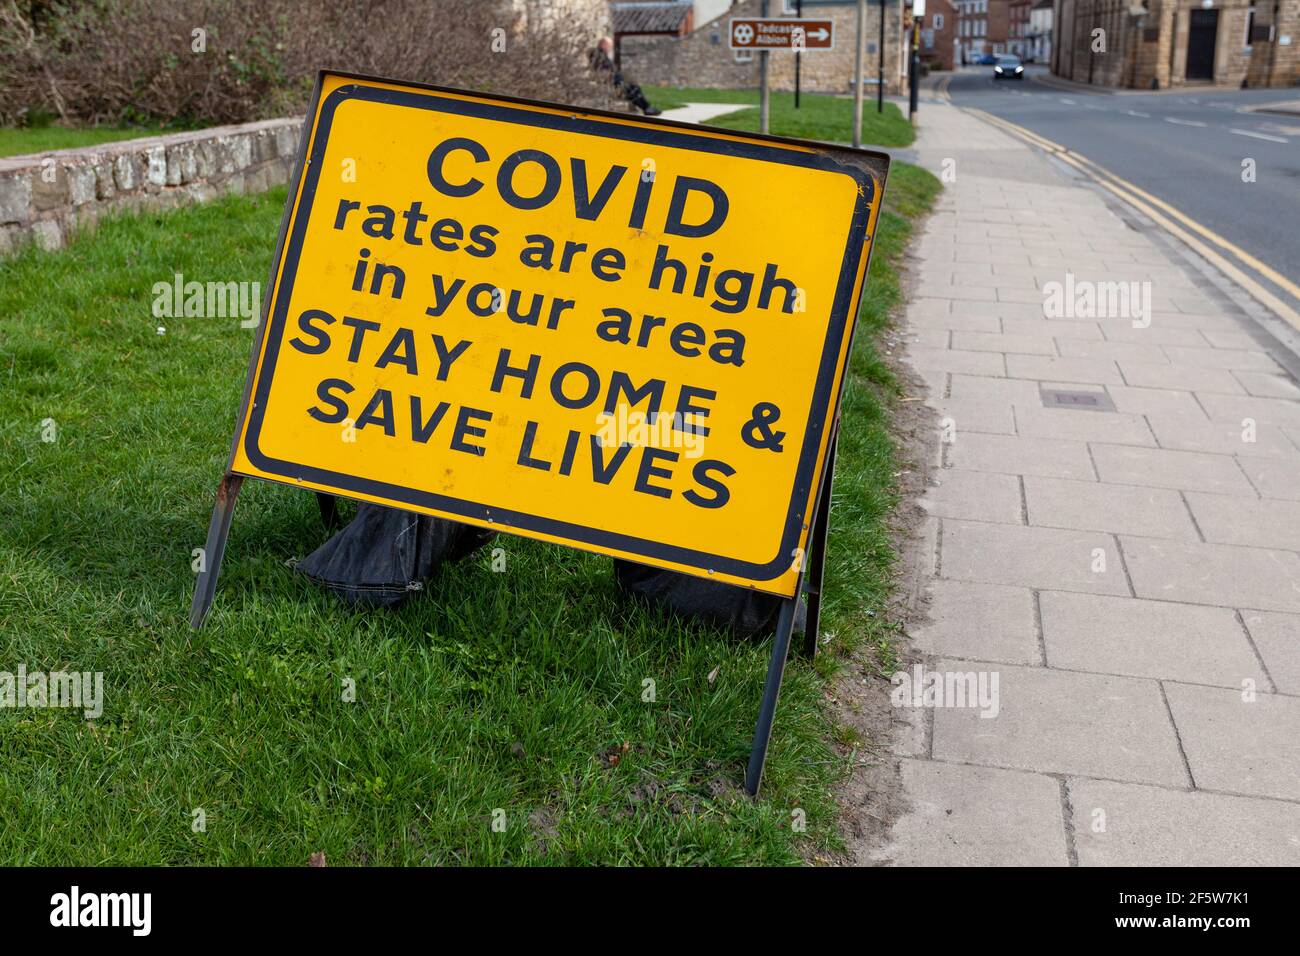 Covid 19 yellow and black roadside warning sign - High rates, stay home, save lives Stock Photo